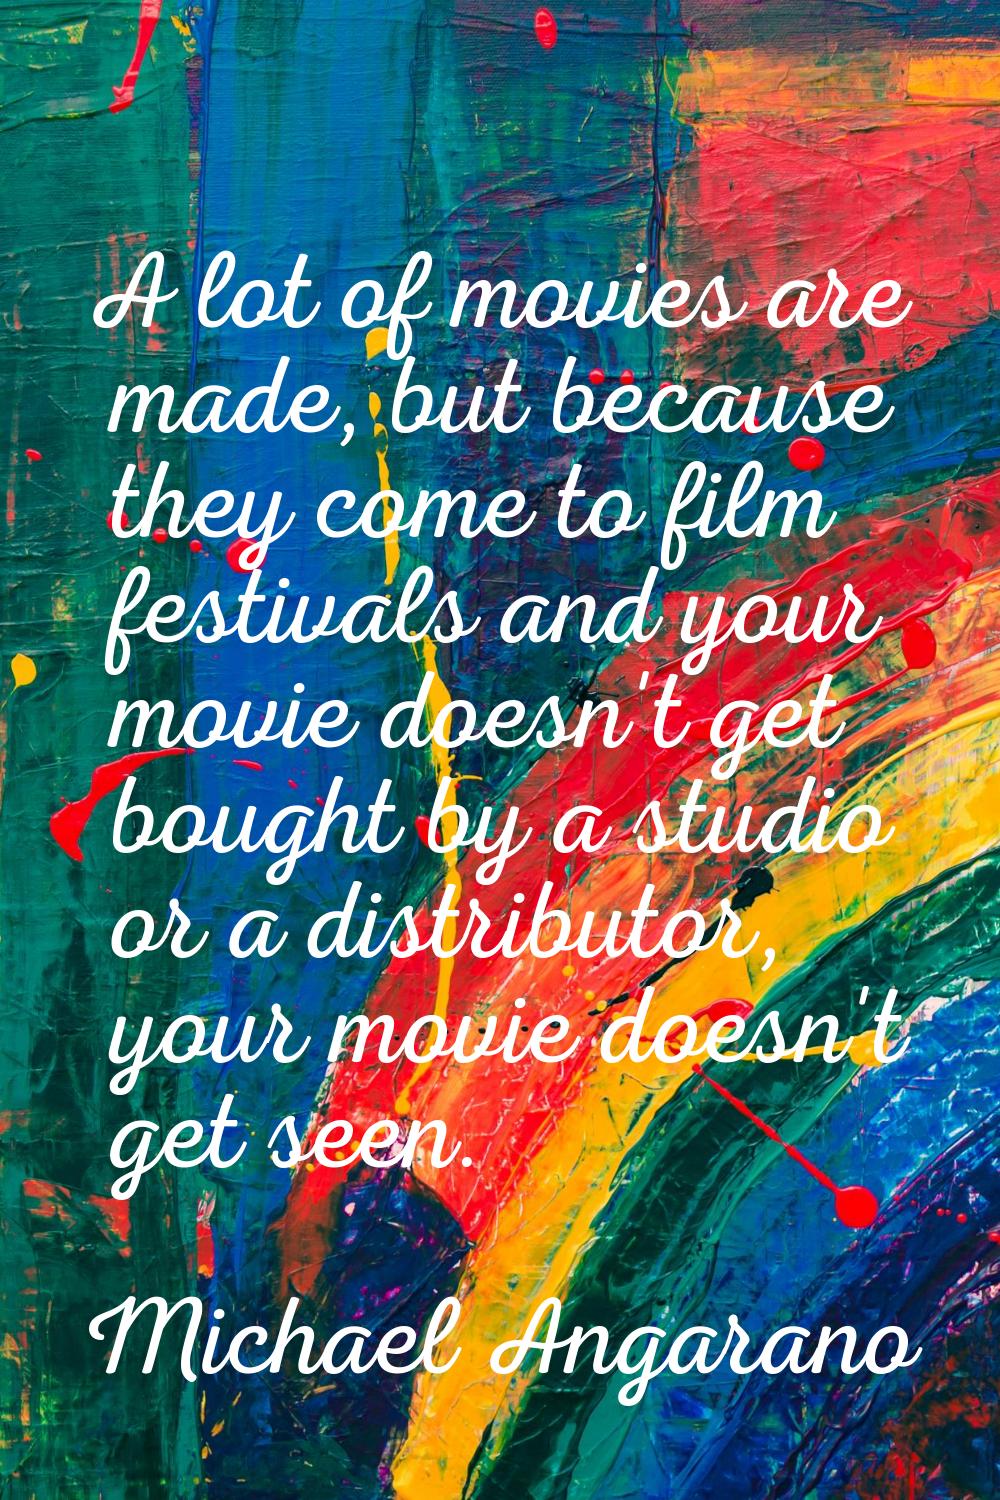 A lot of movies are made, but because they come to film festivals and your movie doesn't get bought